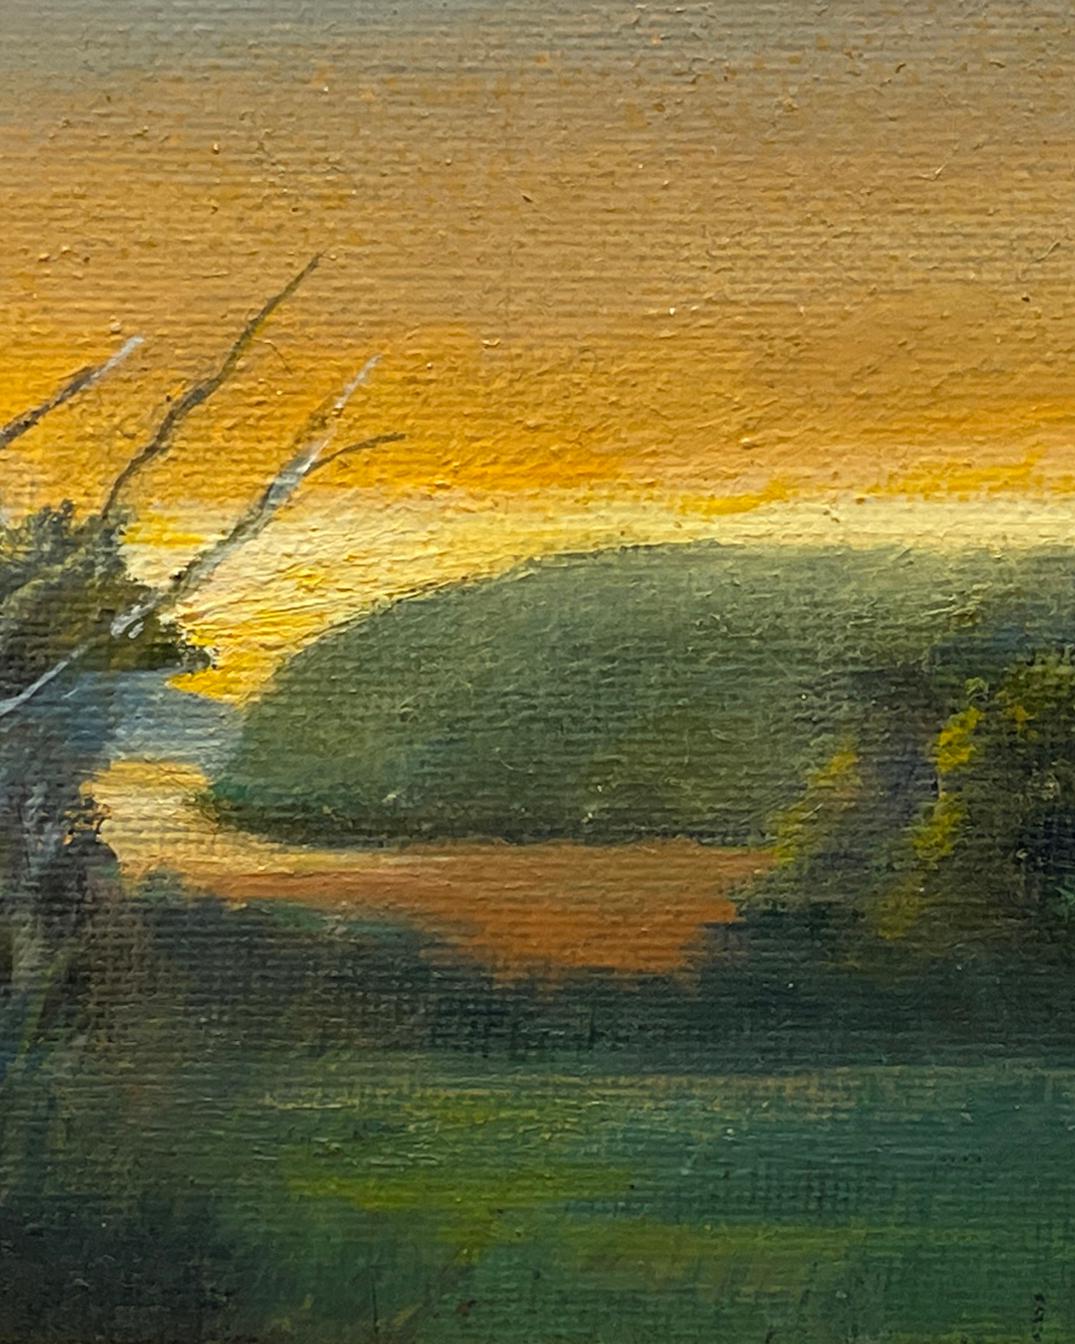 Soft Sky (Landscape of Sun Rising Over Marsh, Influenced by Hudson River School) - Contemporary Painting by Judy Reynolds